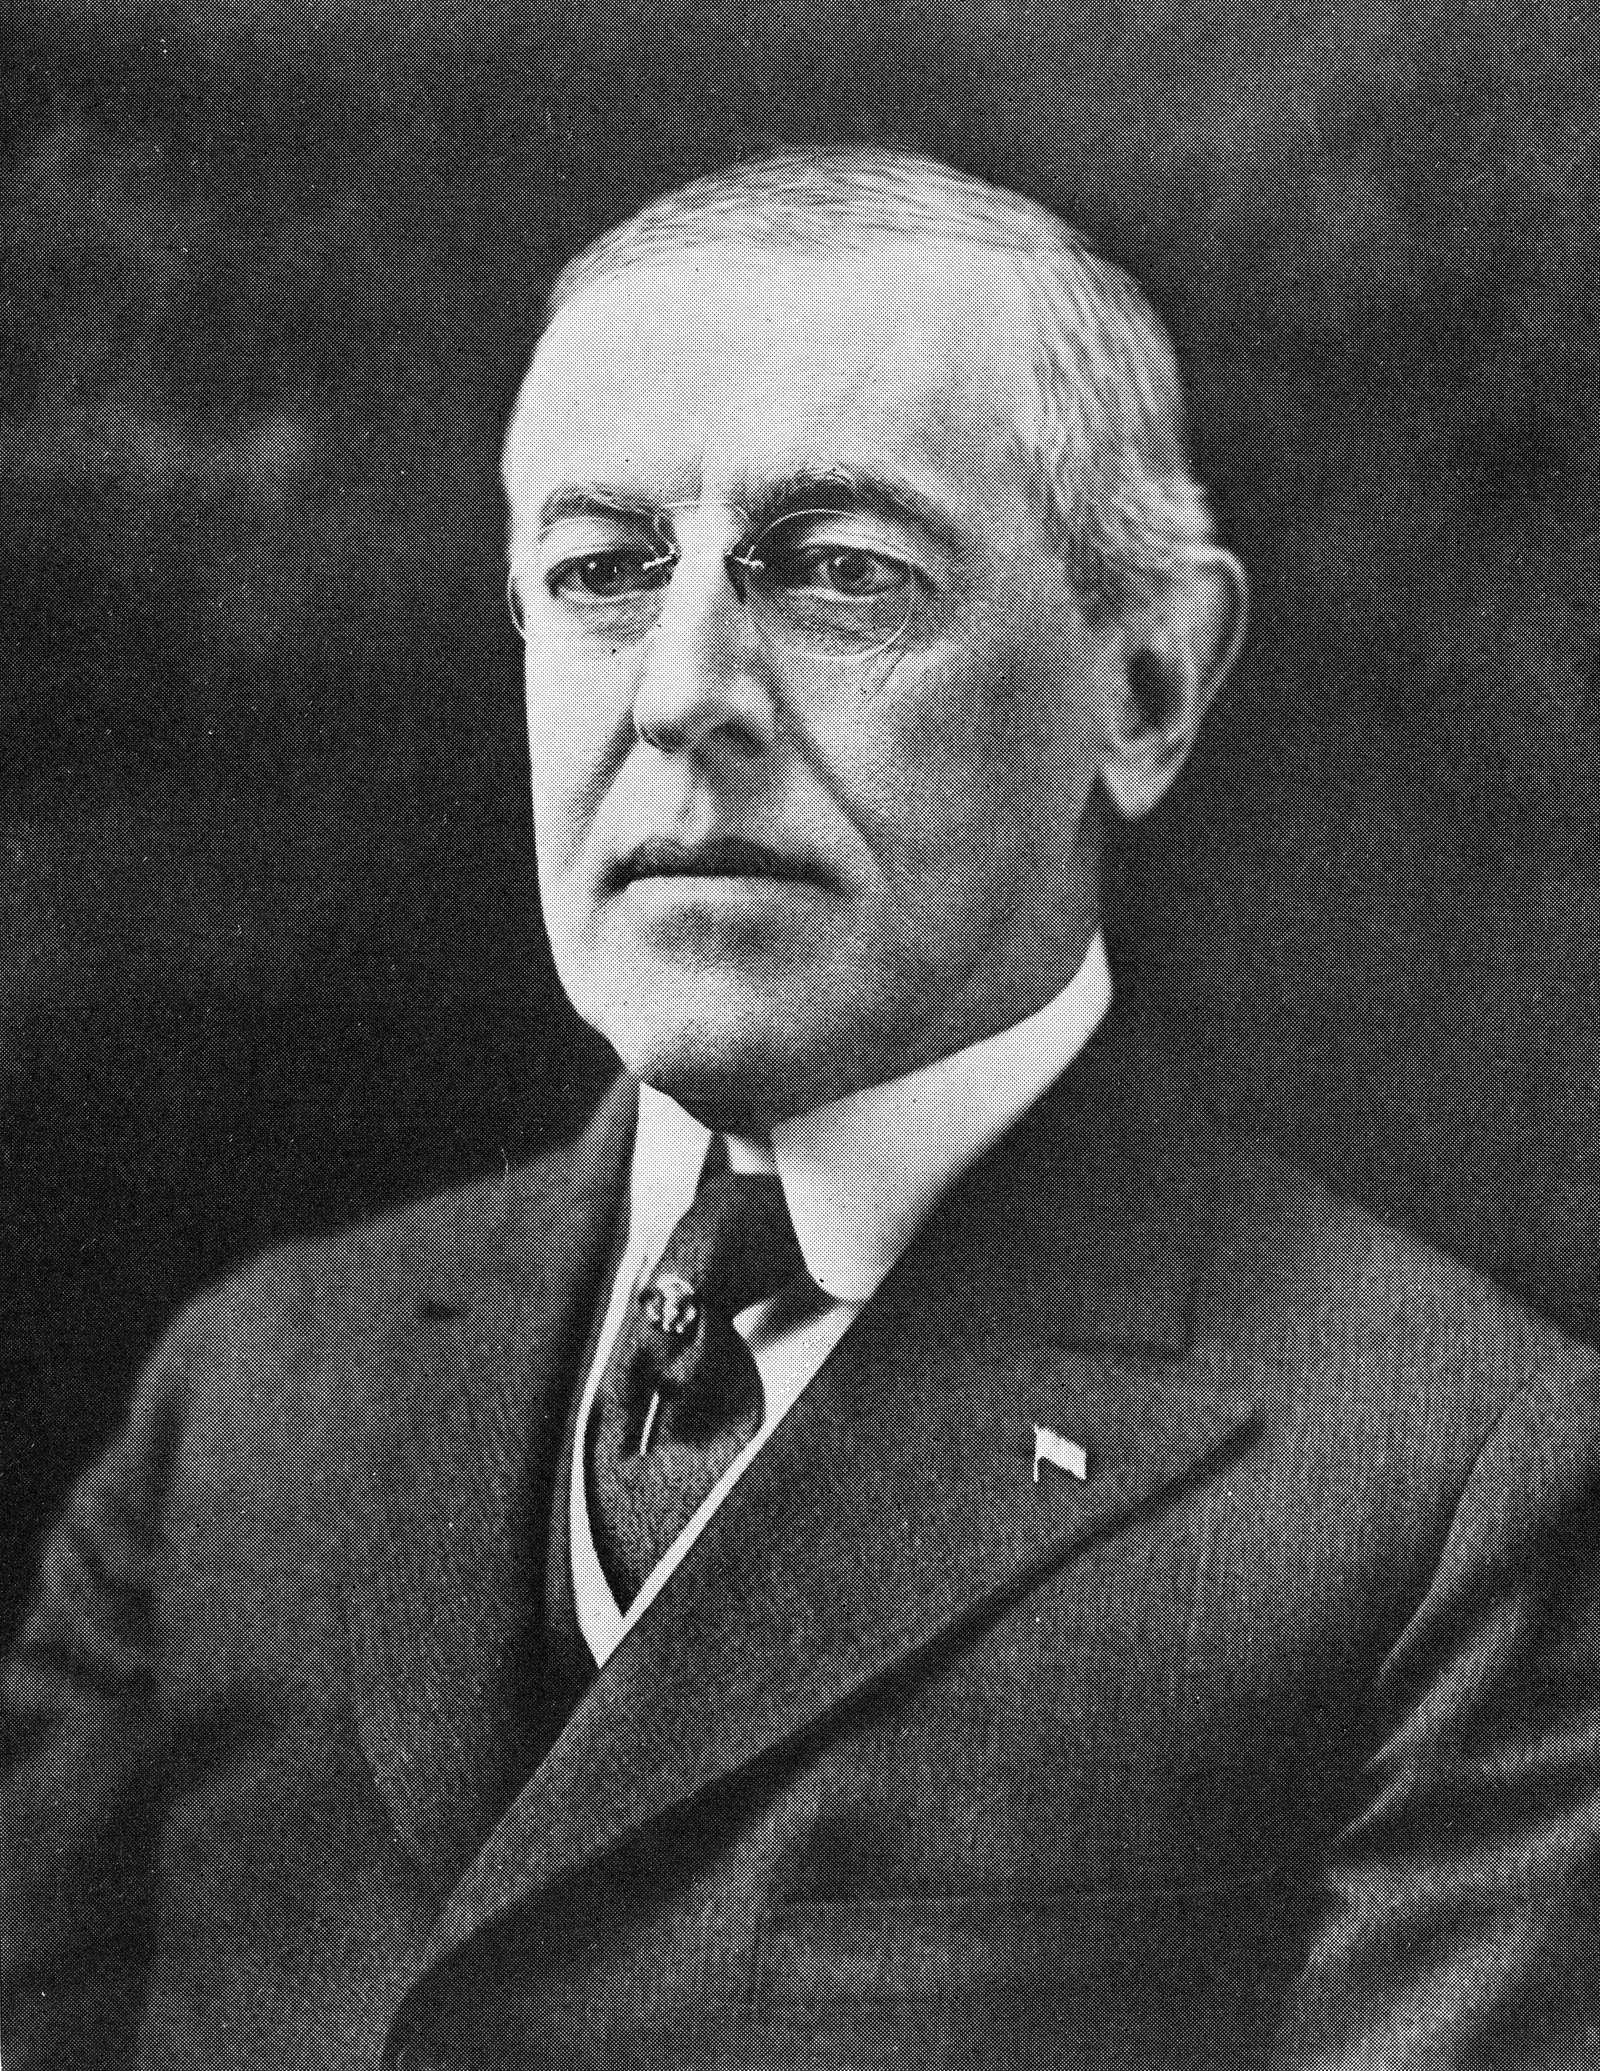 Image - US President Woodrow Wilson was never going to favour Ireland over his wartime ally Britain (Credit: Getty Images)